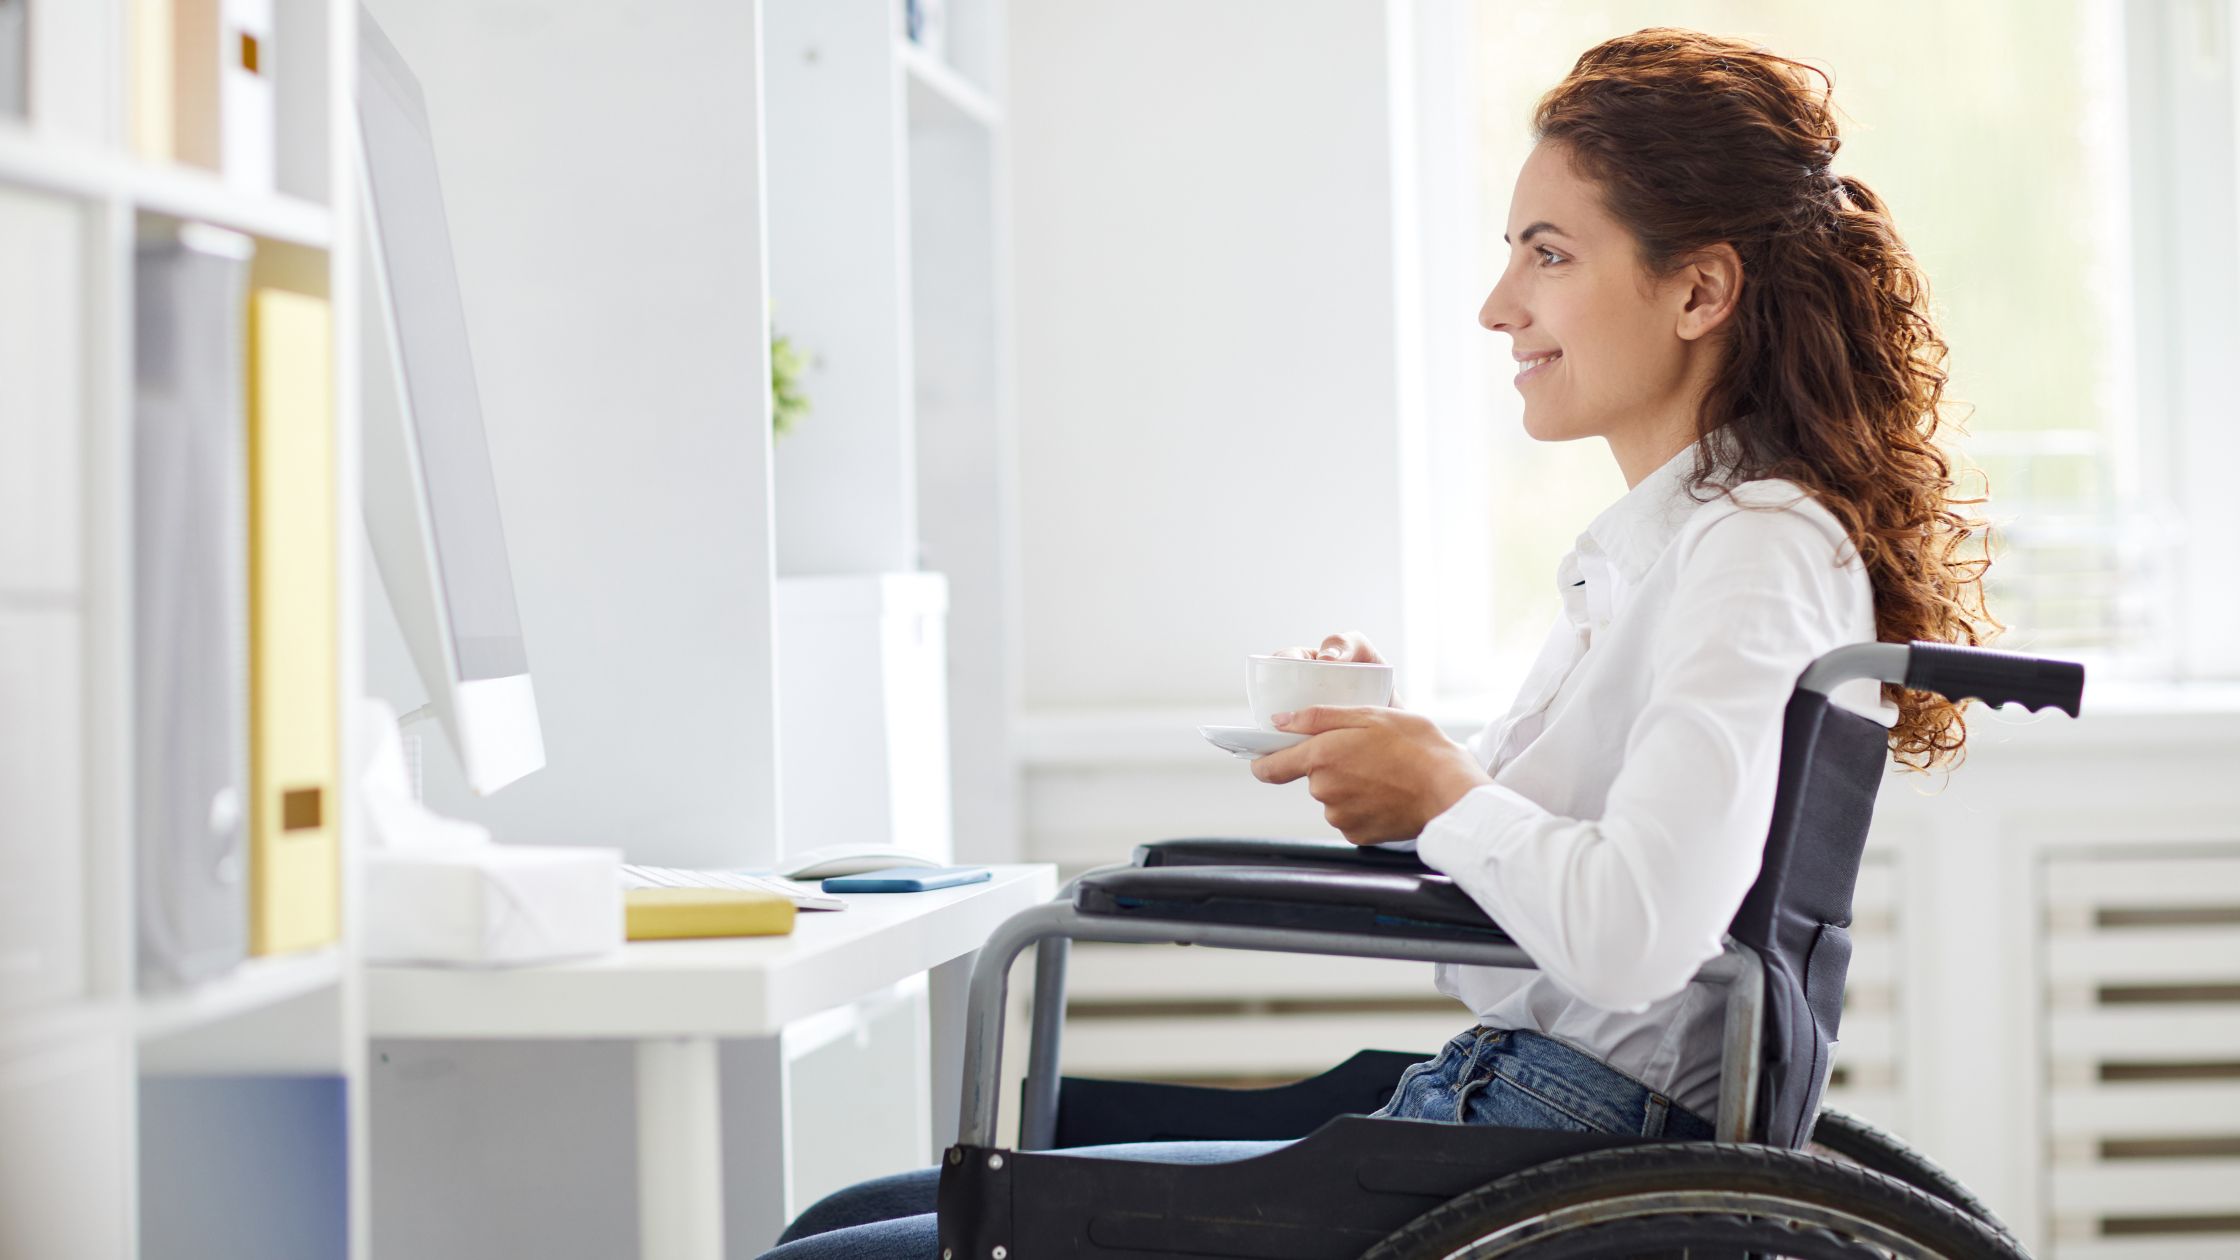 What Can Companies Do To Help Manage The Safety Of Remote Employees With Disabilities?